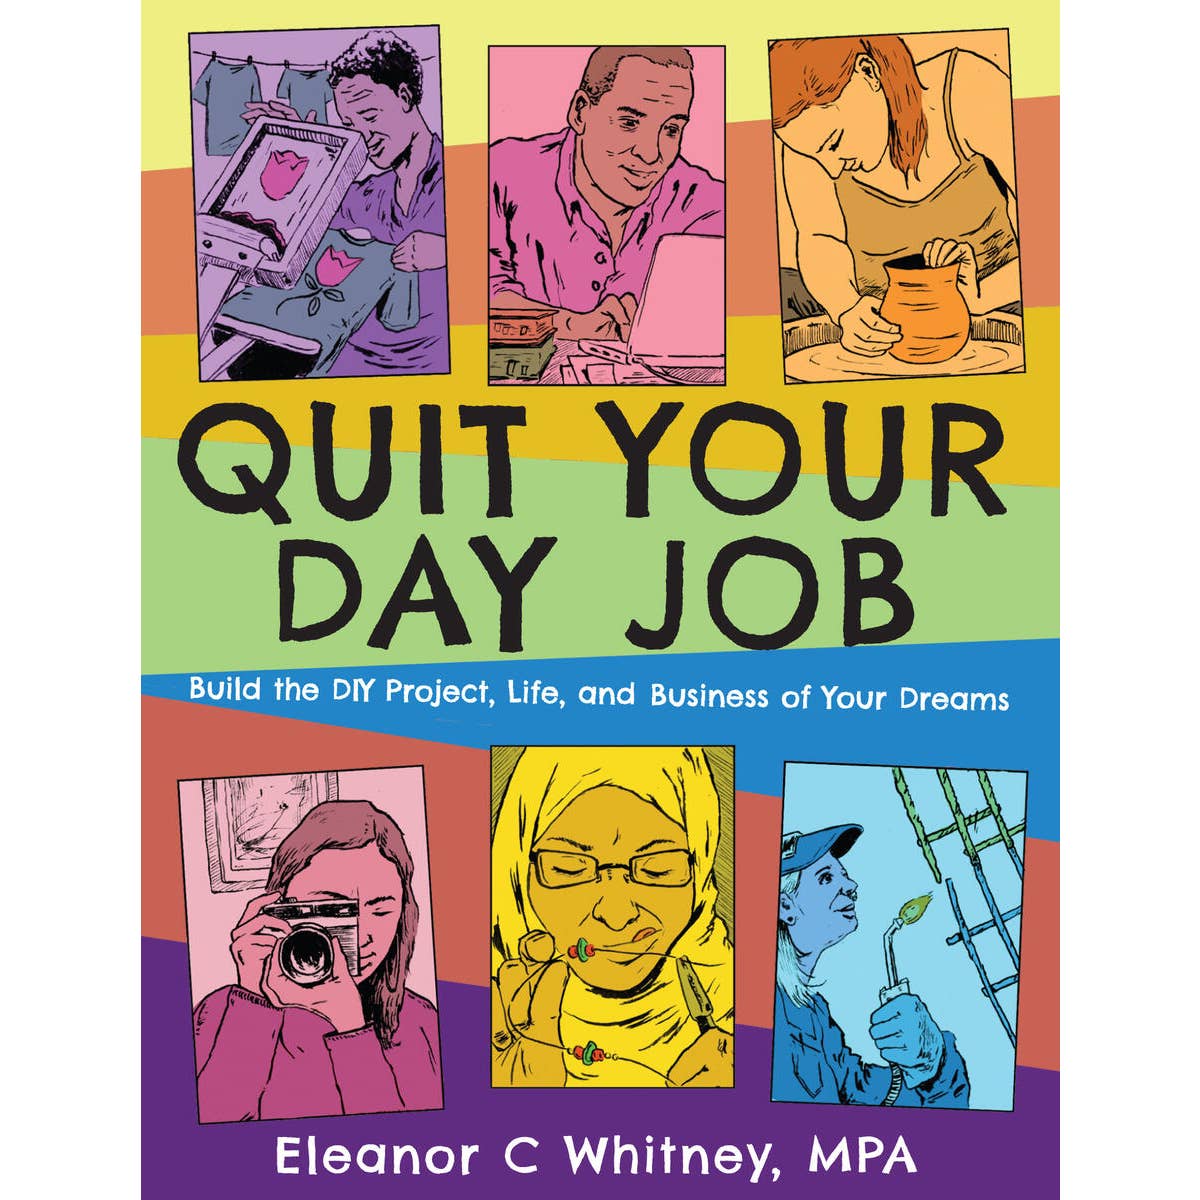 Microcosm - Quit Your Day Job: Build the DIY Life of Your Dreams